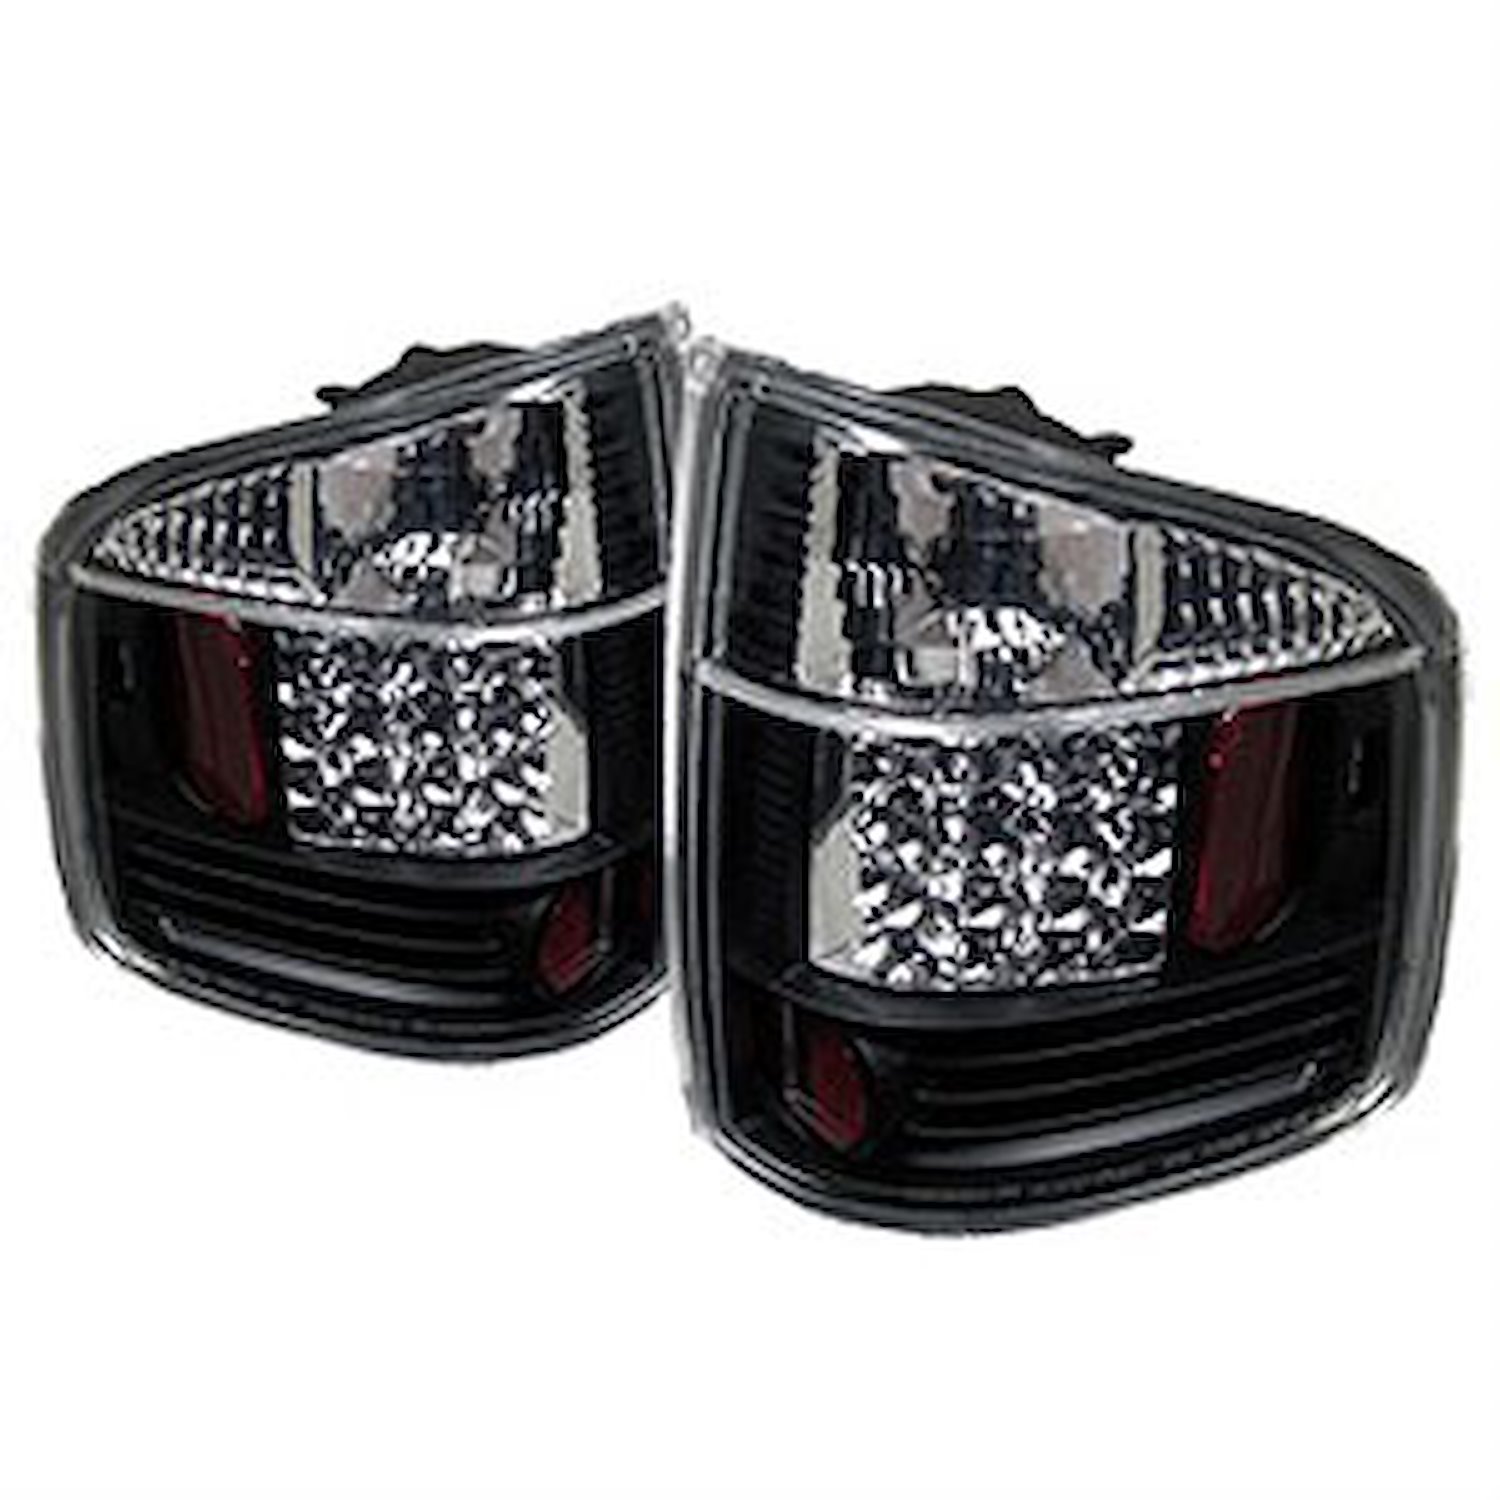 LED Tail Lights 1994-2004 Chevy/GMC S10/Sonoma